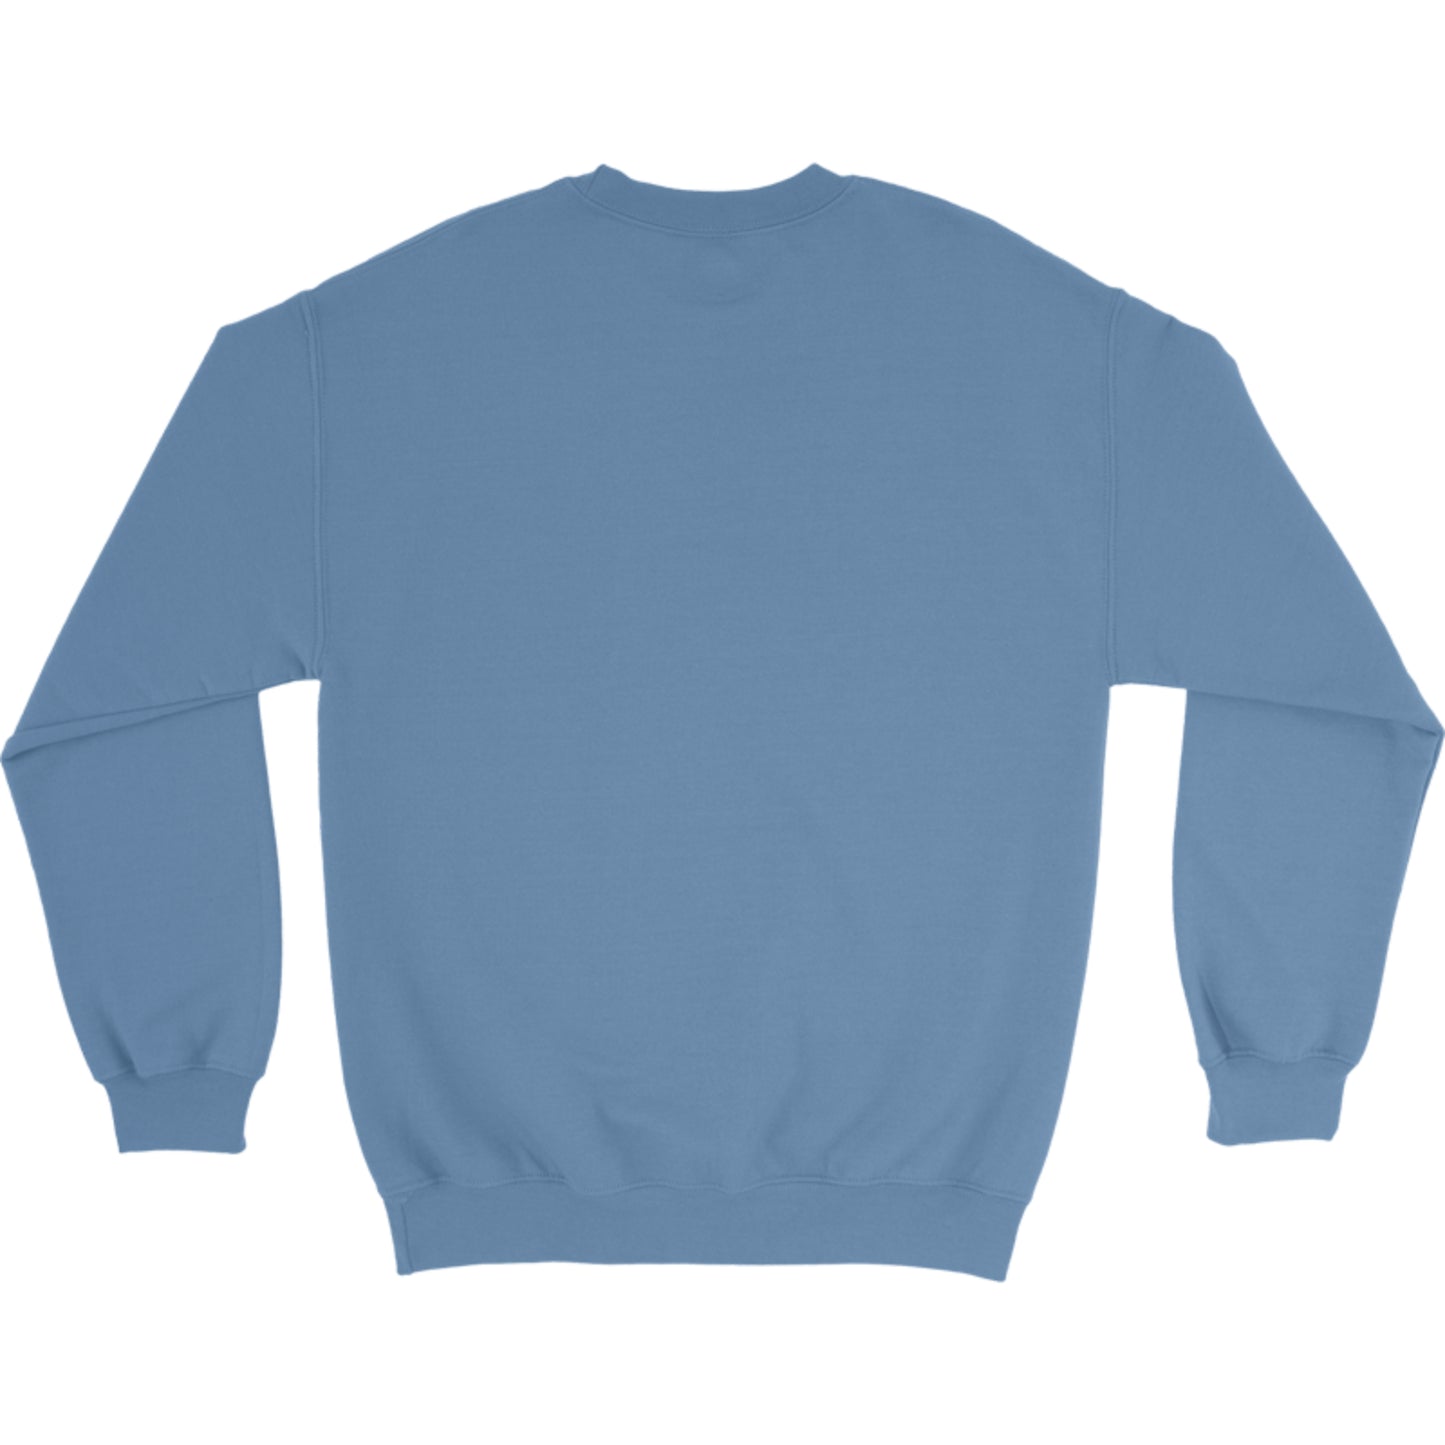 Access to Excellence,  Heavy Blend Crewneck sweatshirt